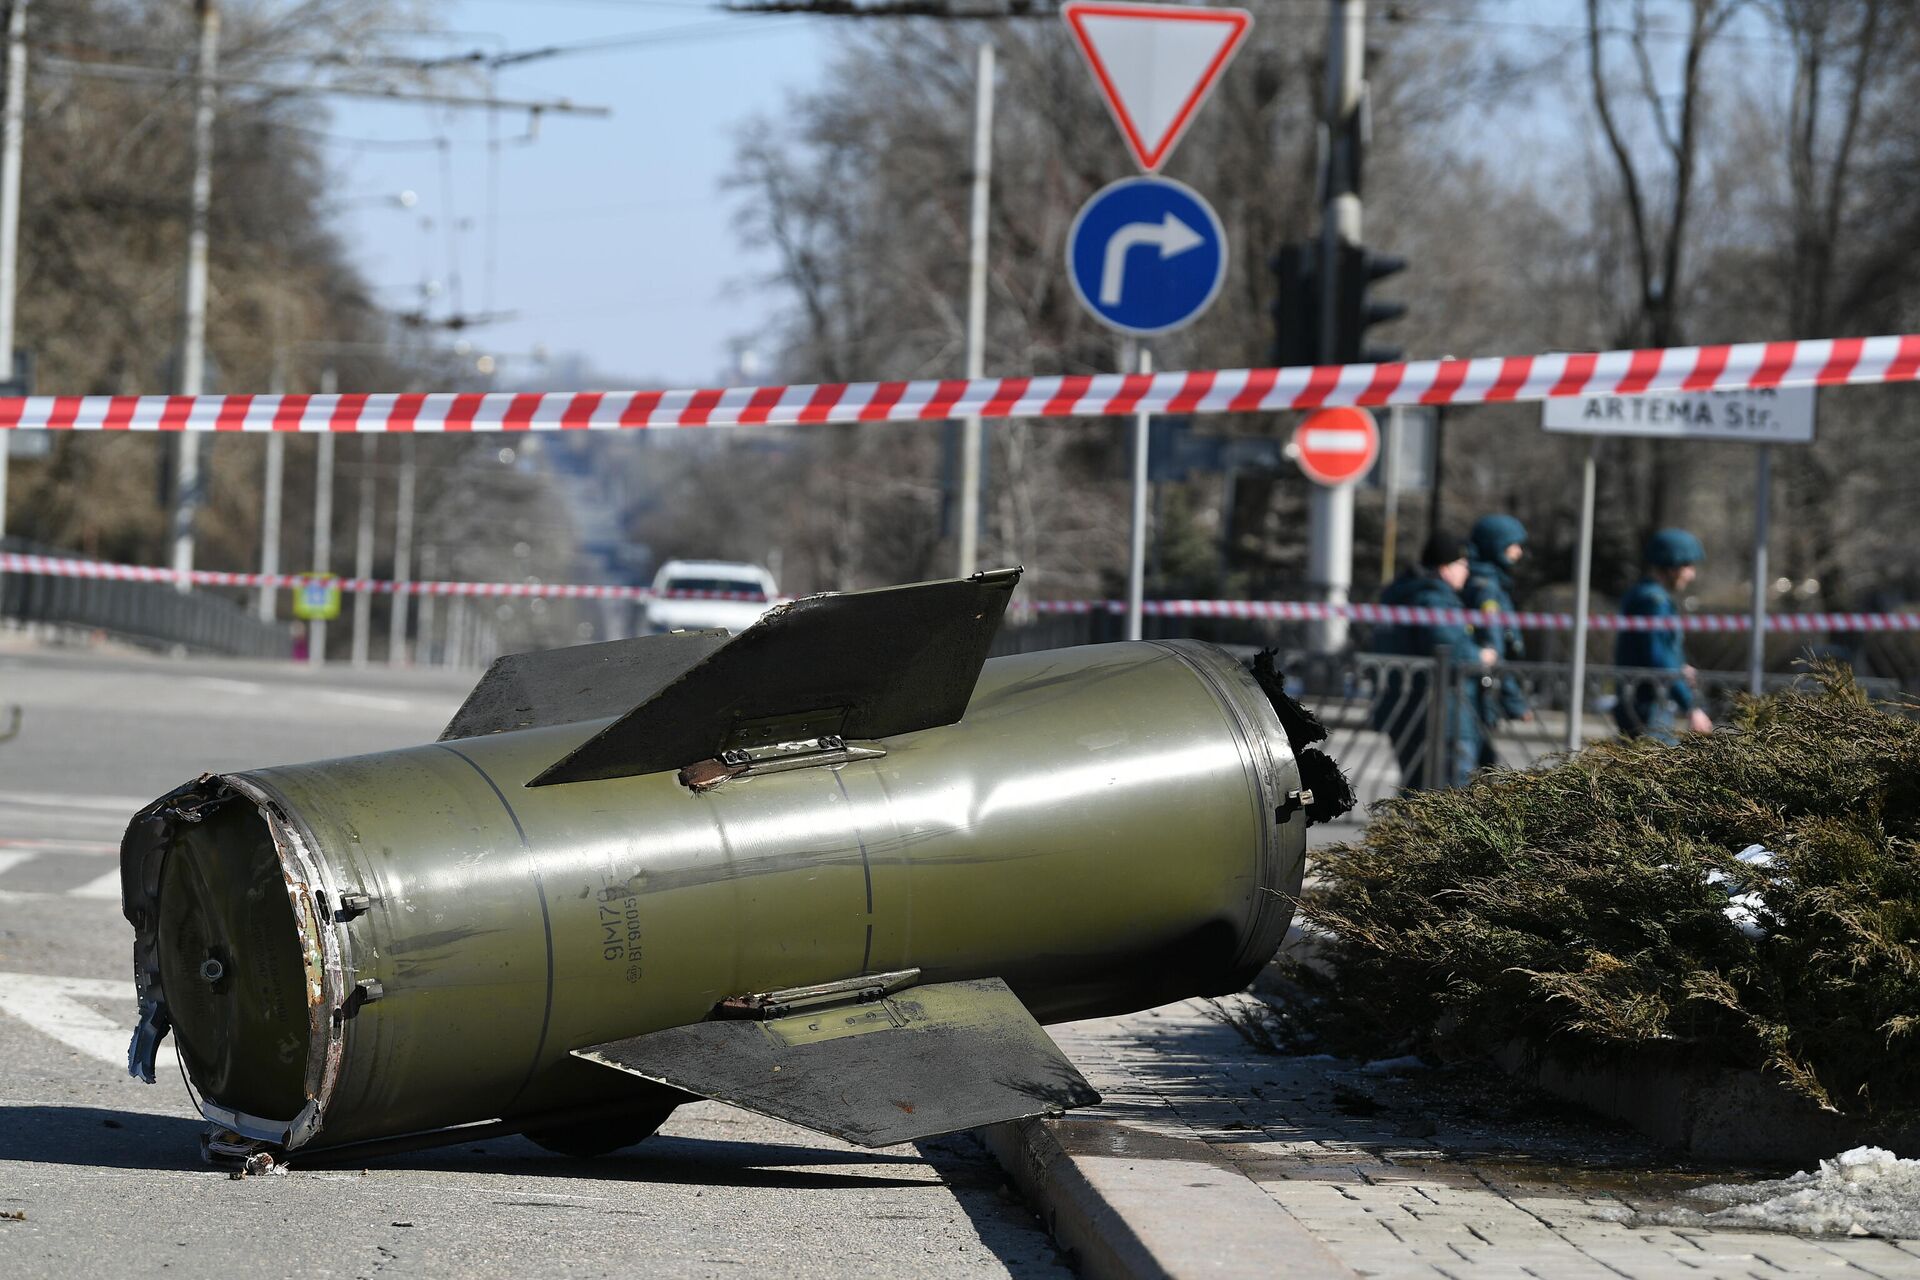 A fragment of an Ukrainian Tochka-U missile which had been shot down near the Government House in the city center during a recent shelling is pictured in Donetsk, Donetsk People's Republic. - Sputnik International, 1920, 14.11.2022